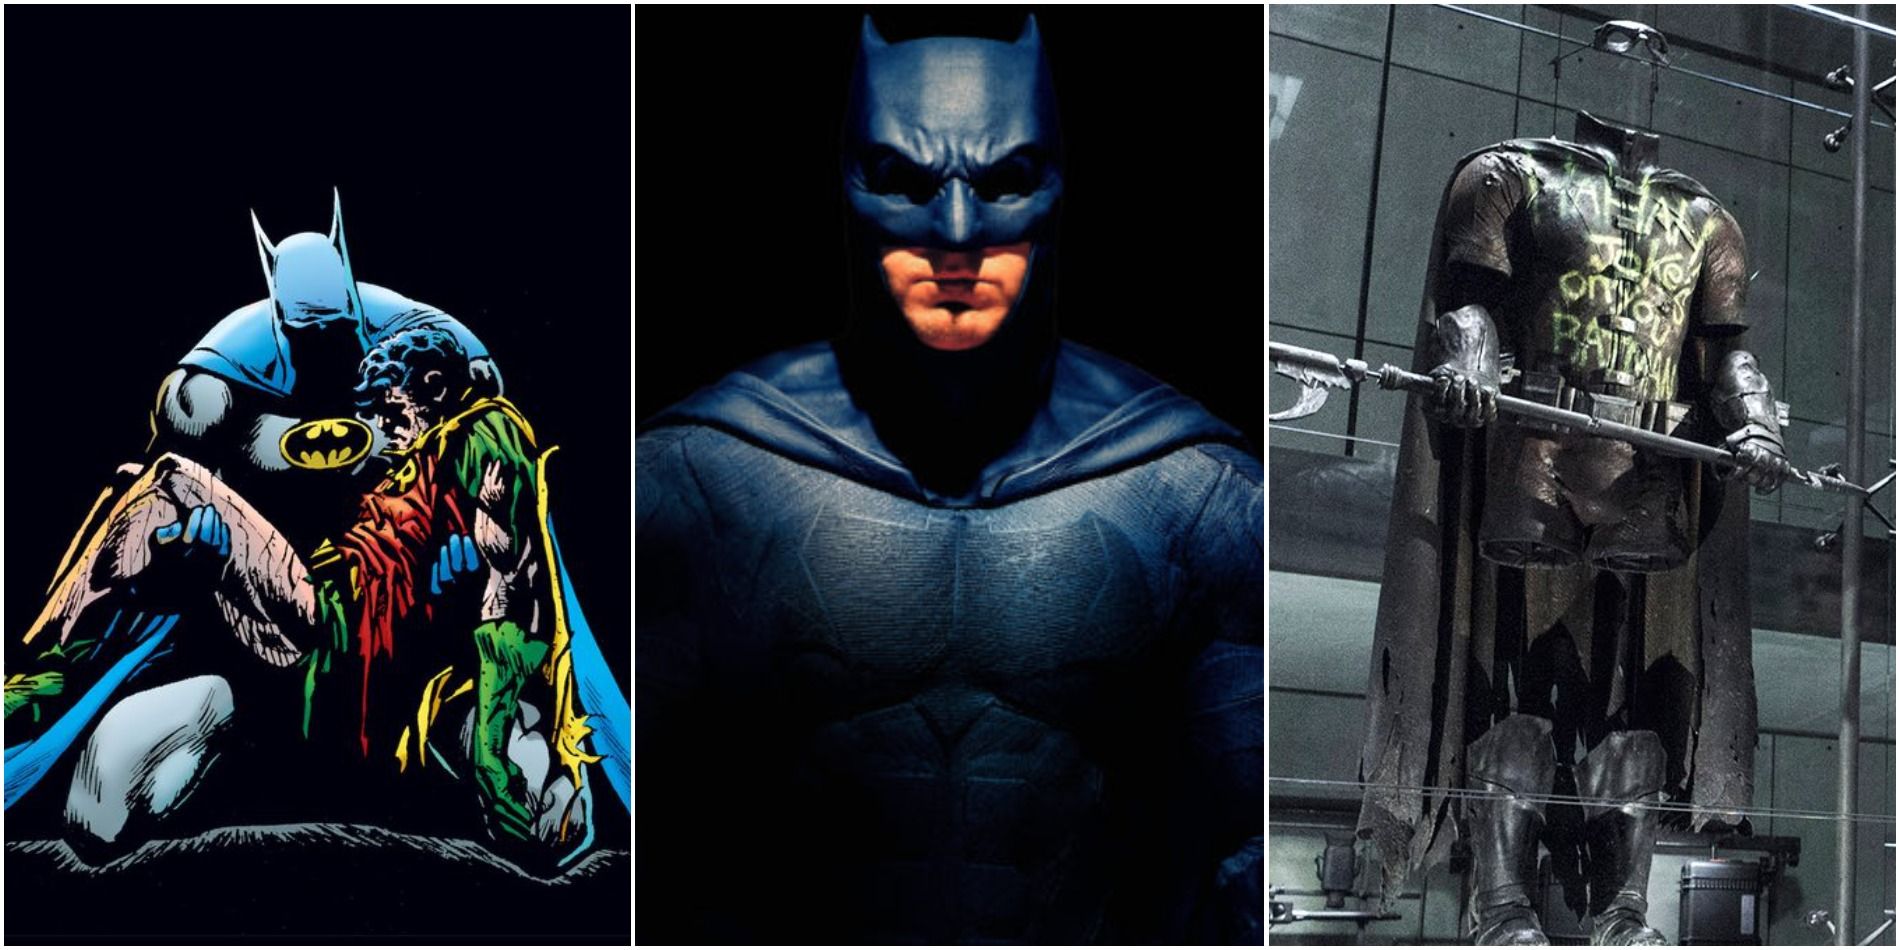 Cover art for A Death in the Family by Jim Starlin, promo shot of Affleck as Batman for 2017's Justice League and a still of Robin's suit in Batman v Superman